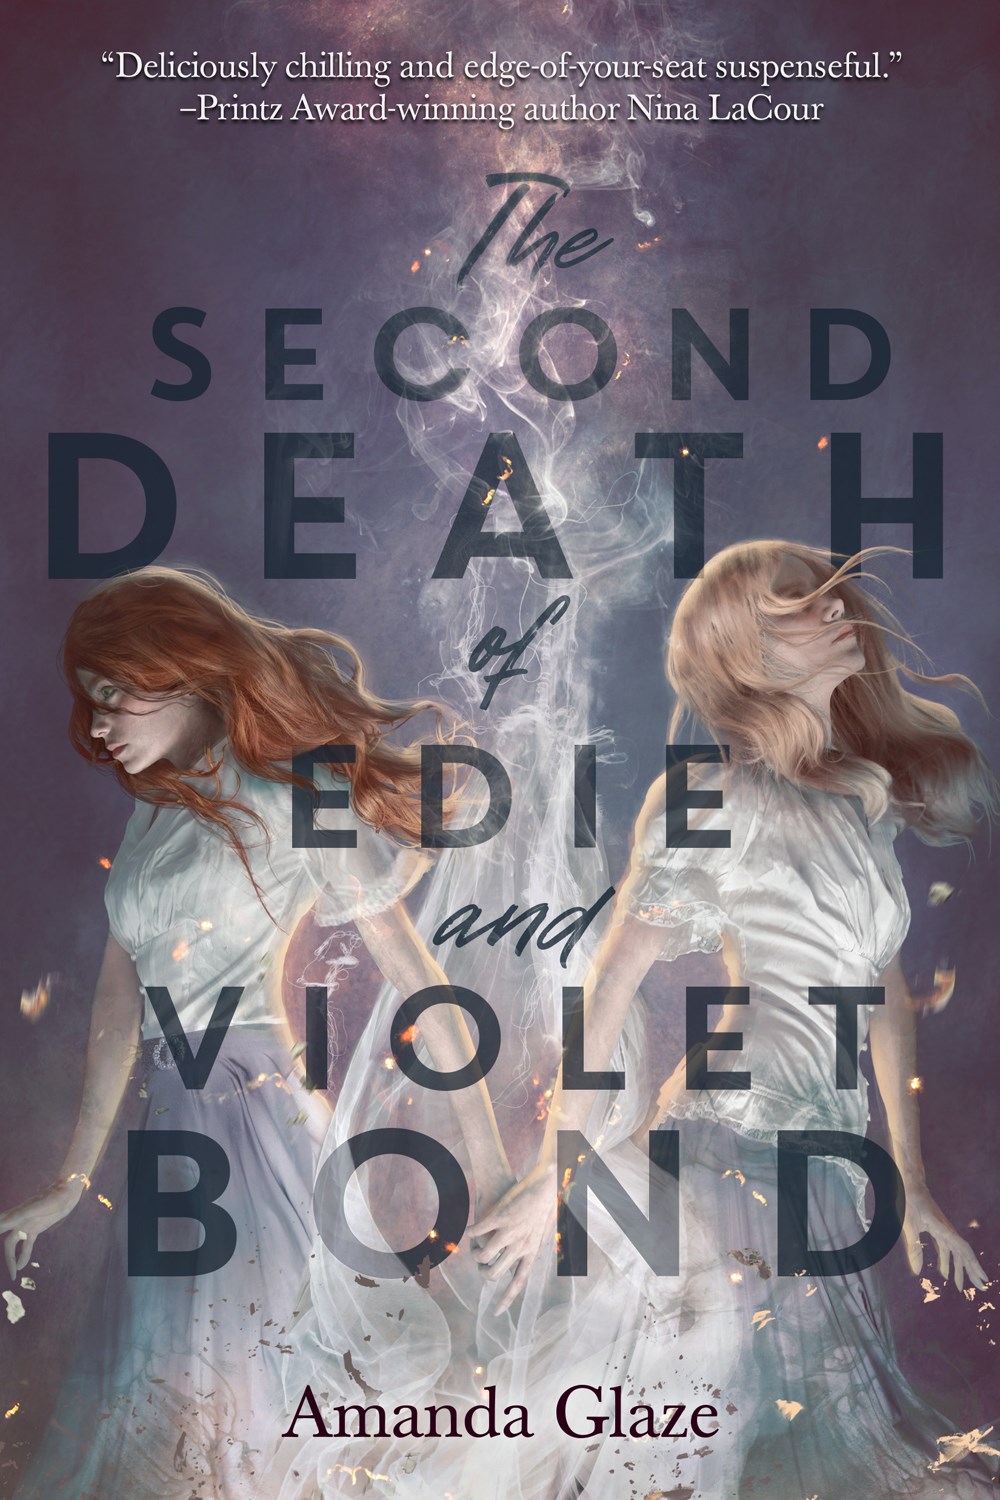 The Second Death of Edie and Violet Bond by Amanda Glaze